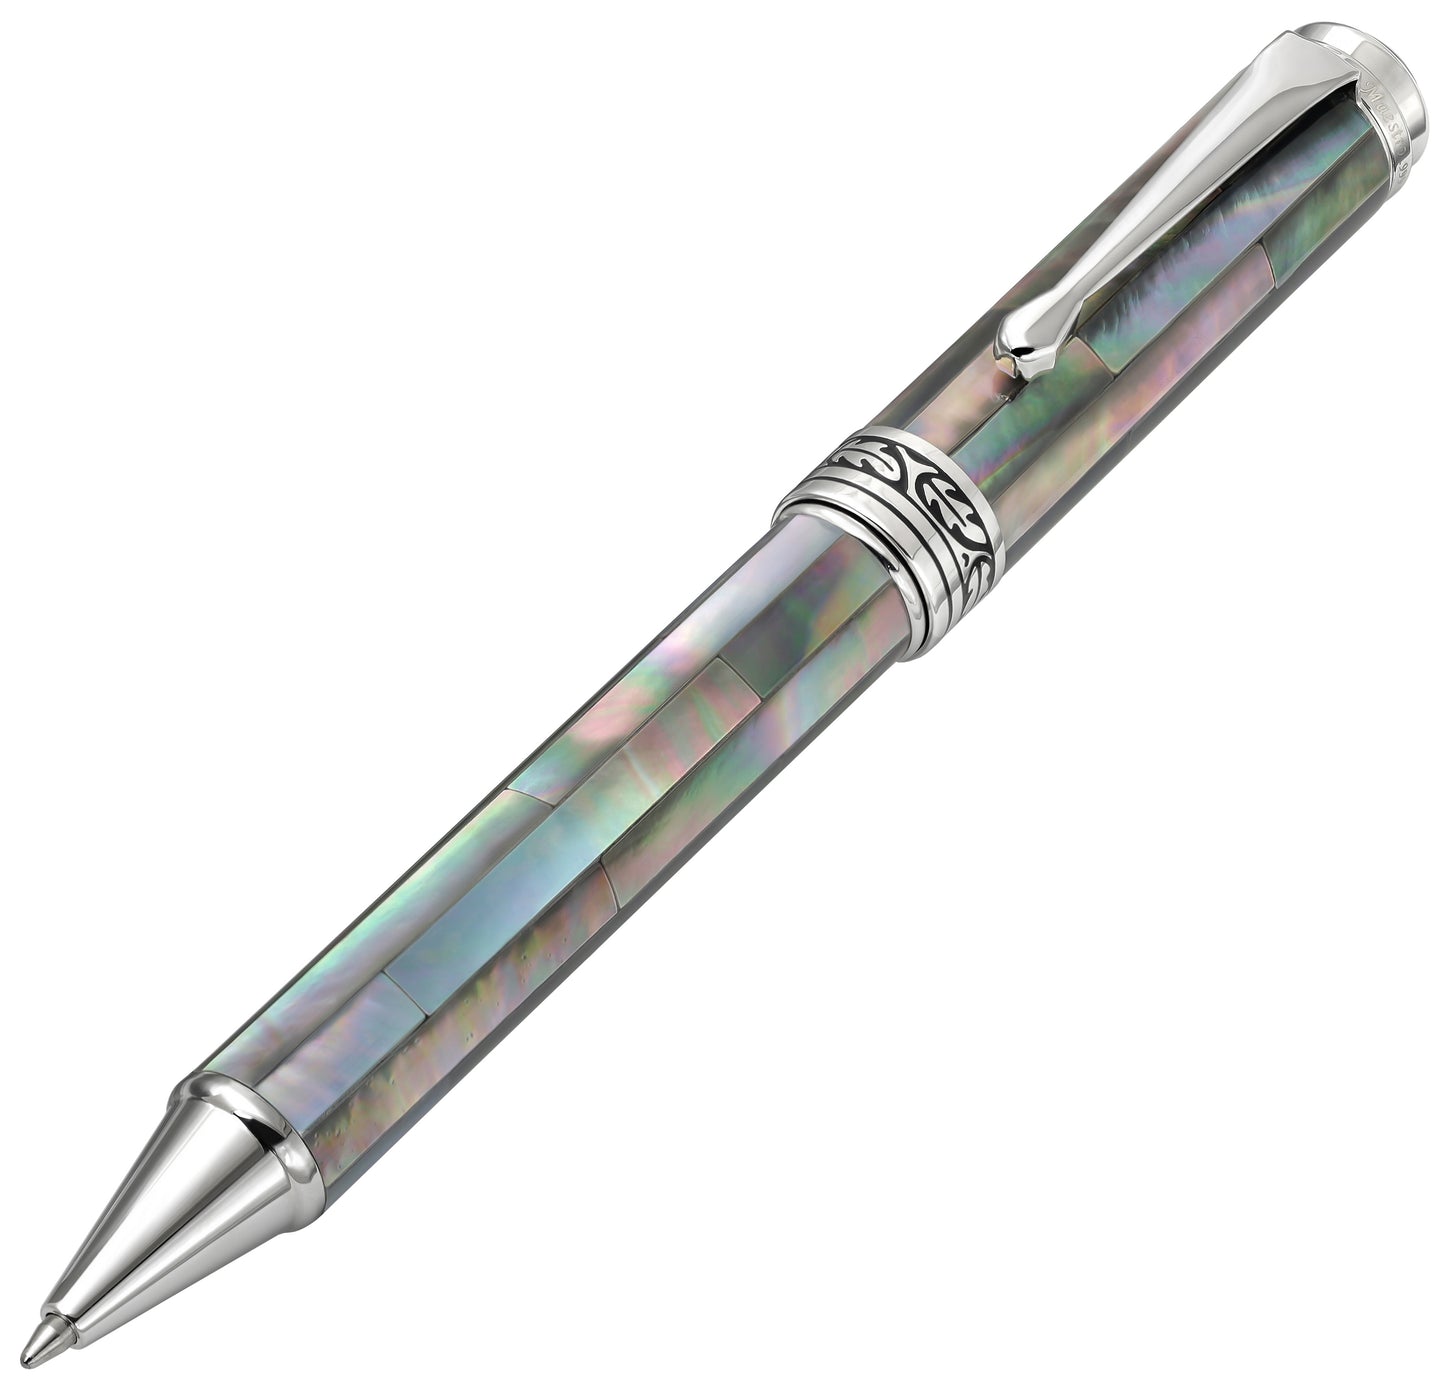 Xezo - Angled front view of the Maestro Black Mother of Pearl B ballpoint pen